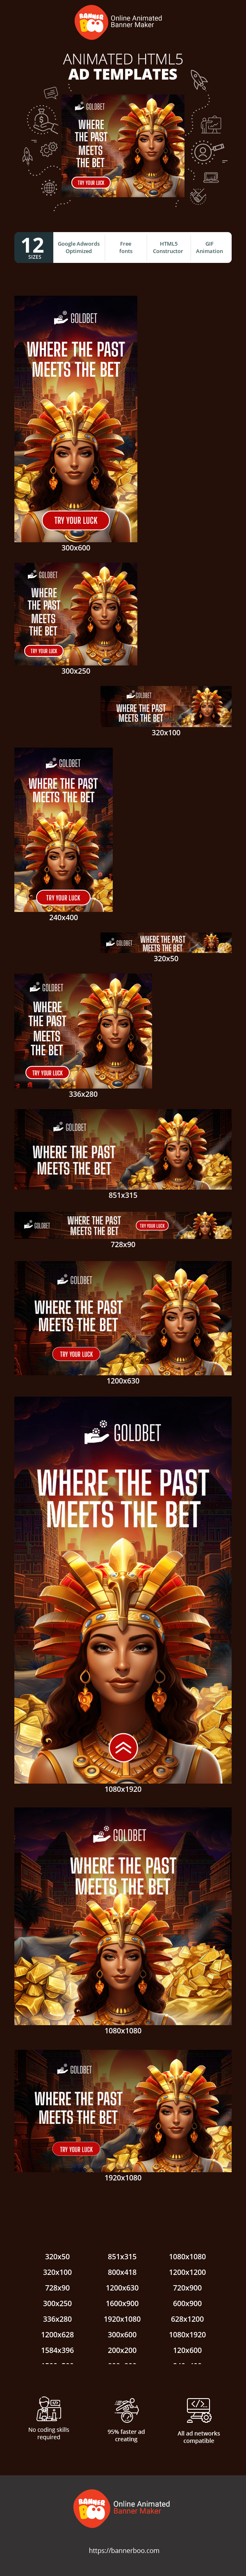 Banner ad template — Where the Past Meets the Bet — Gambling